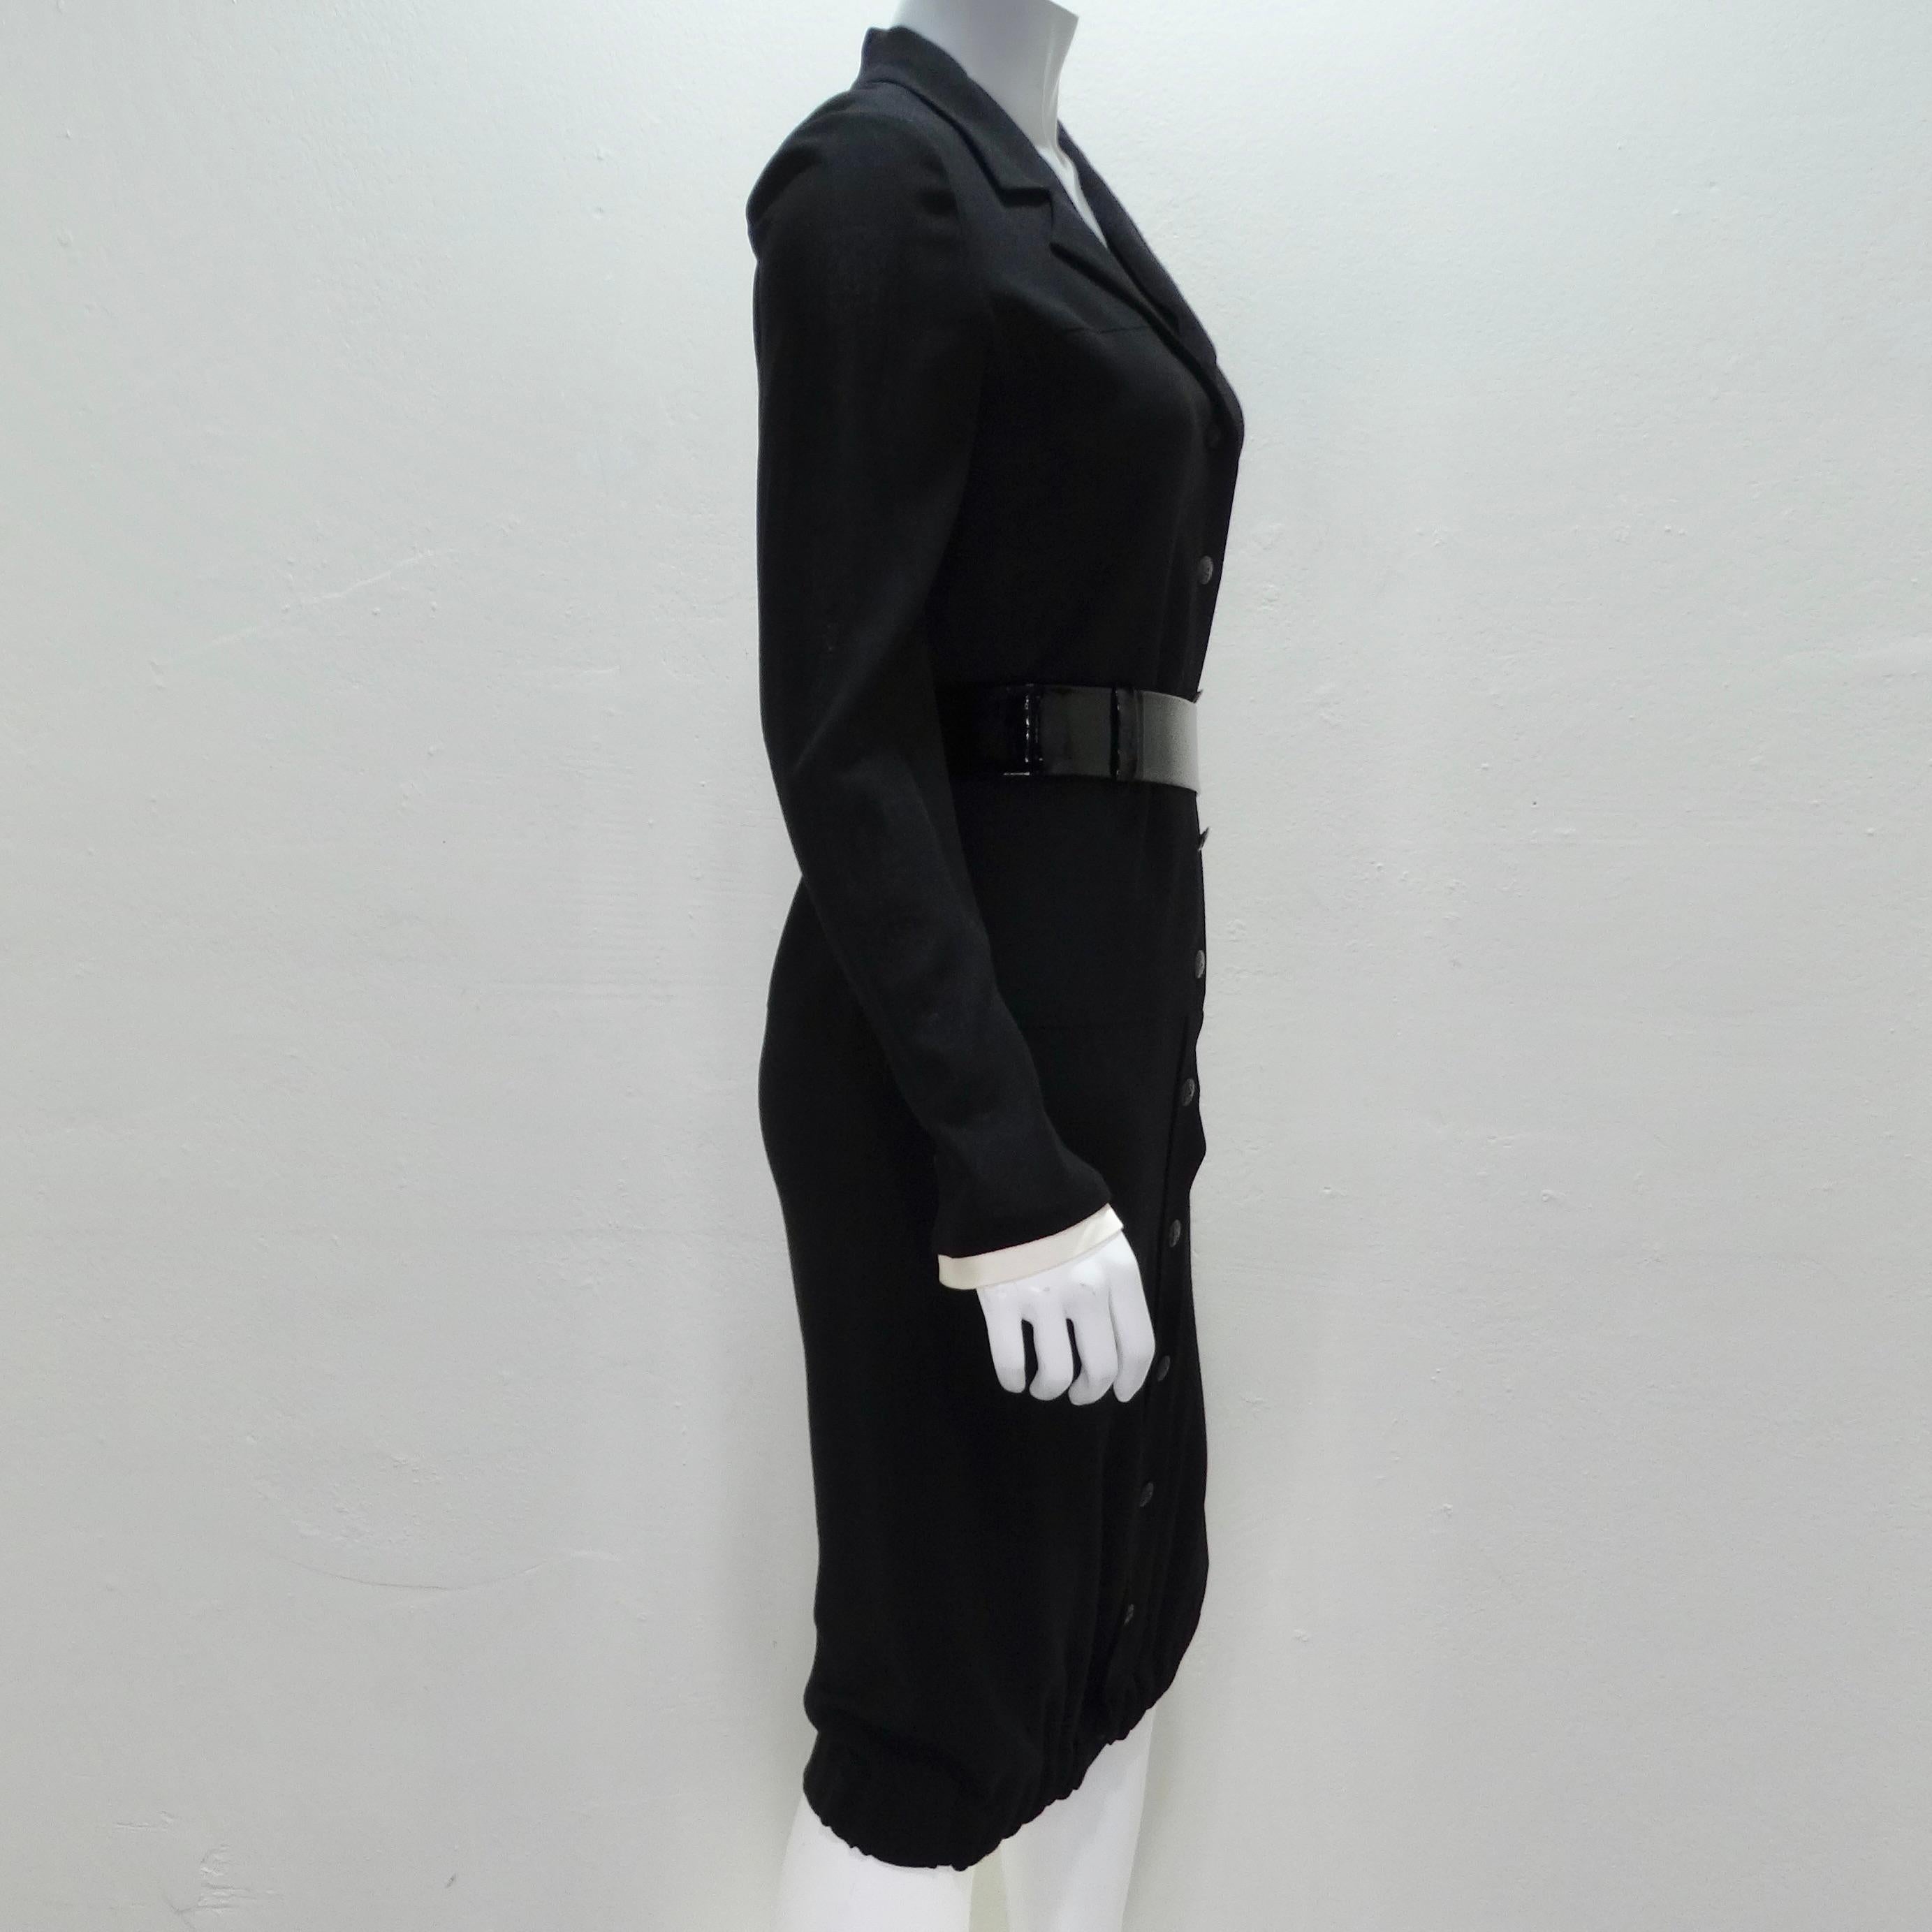 Chanel 2004 Black Button Up Collared Dress and Belt For Sale 4